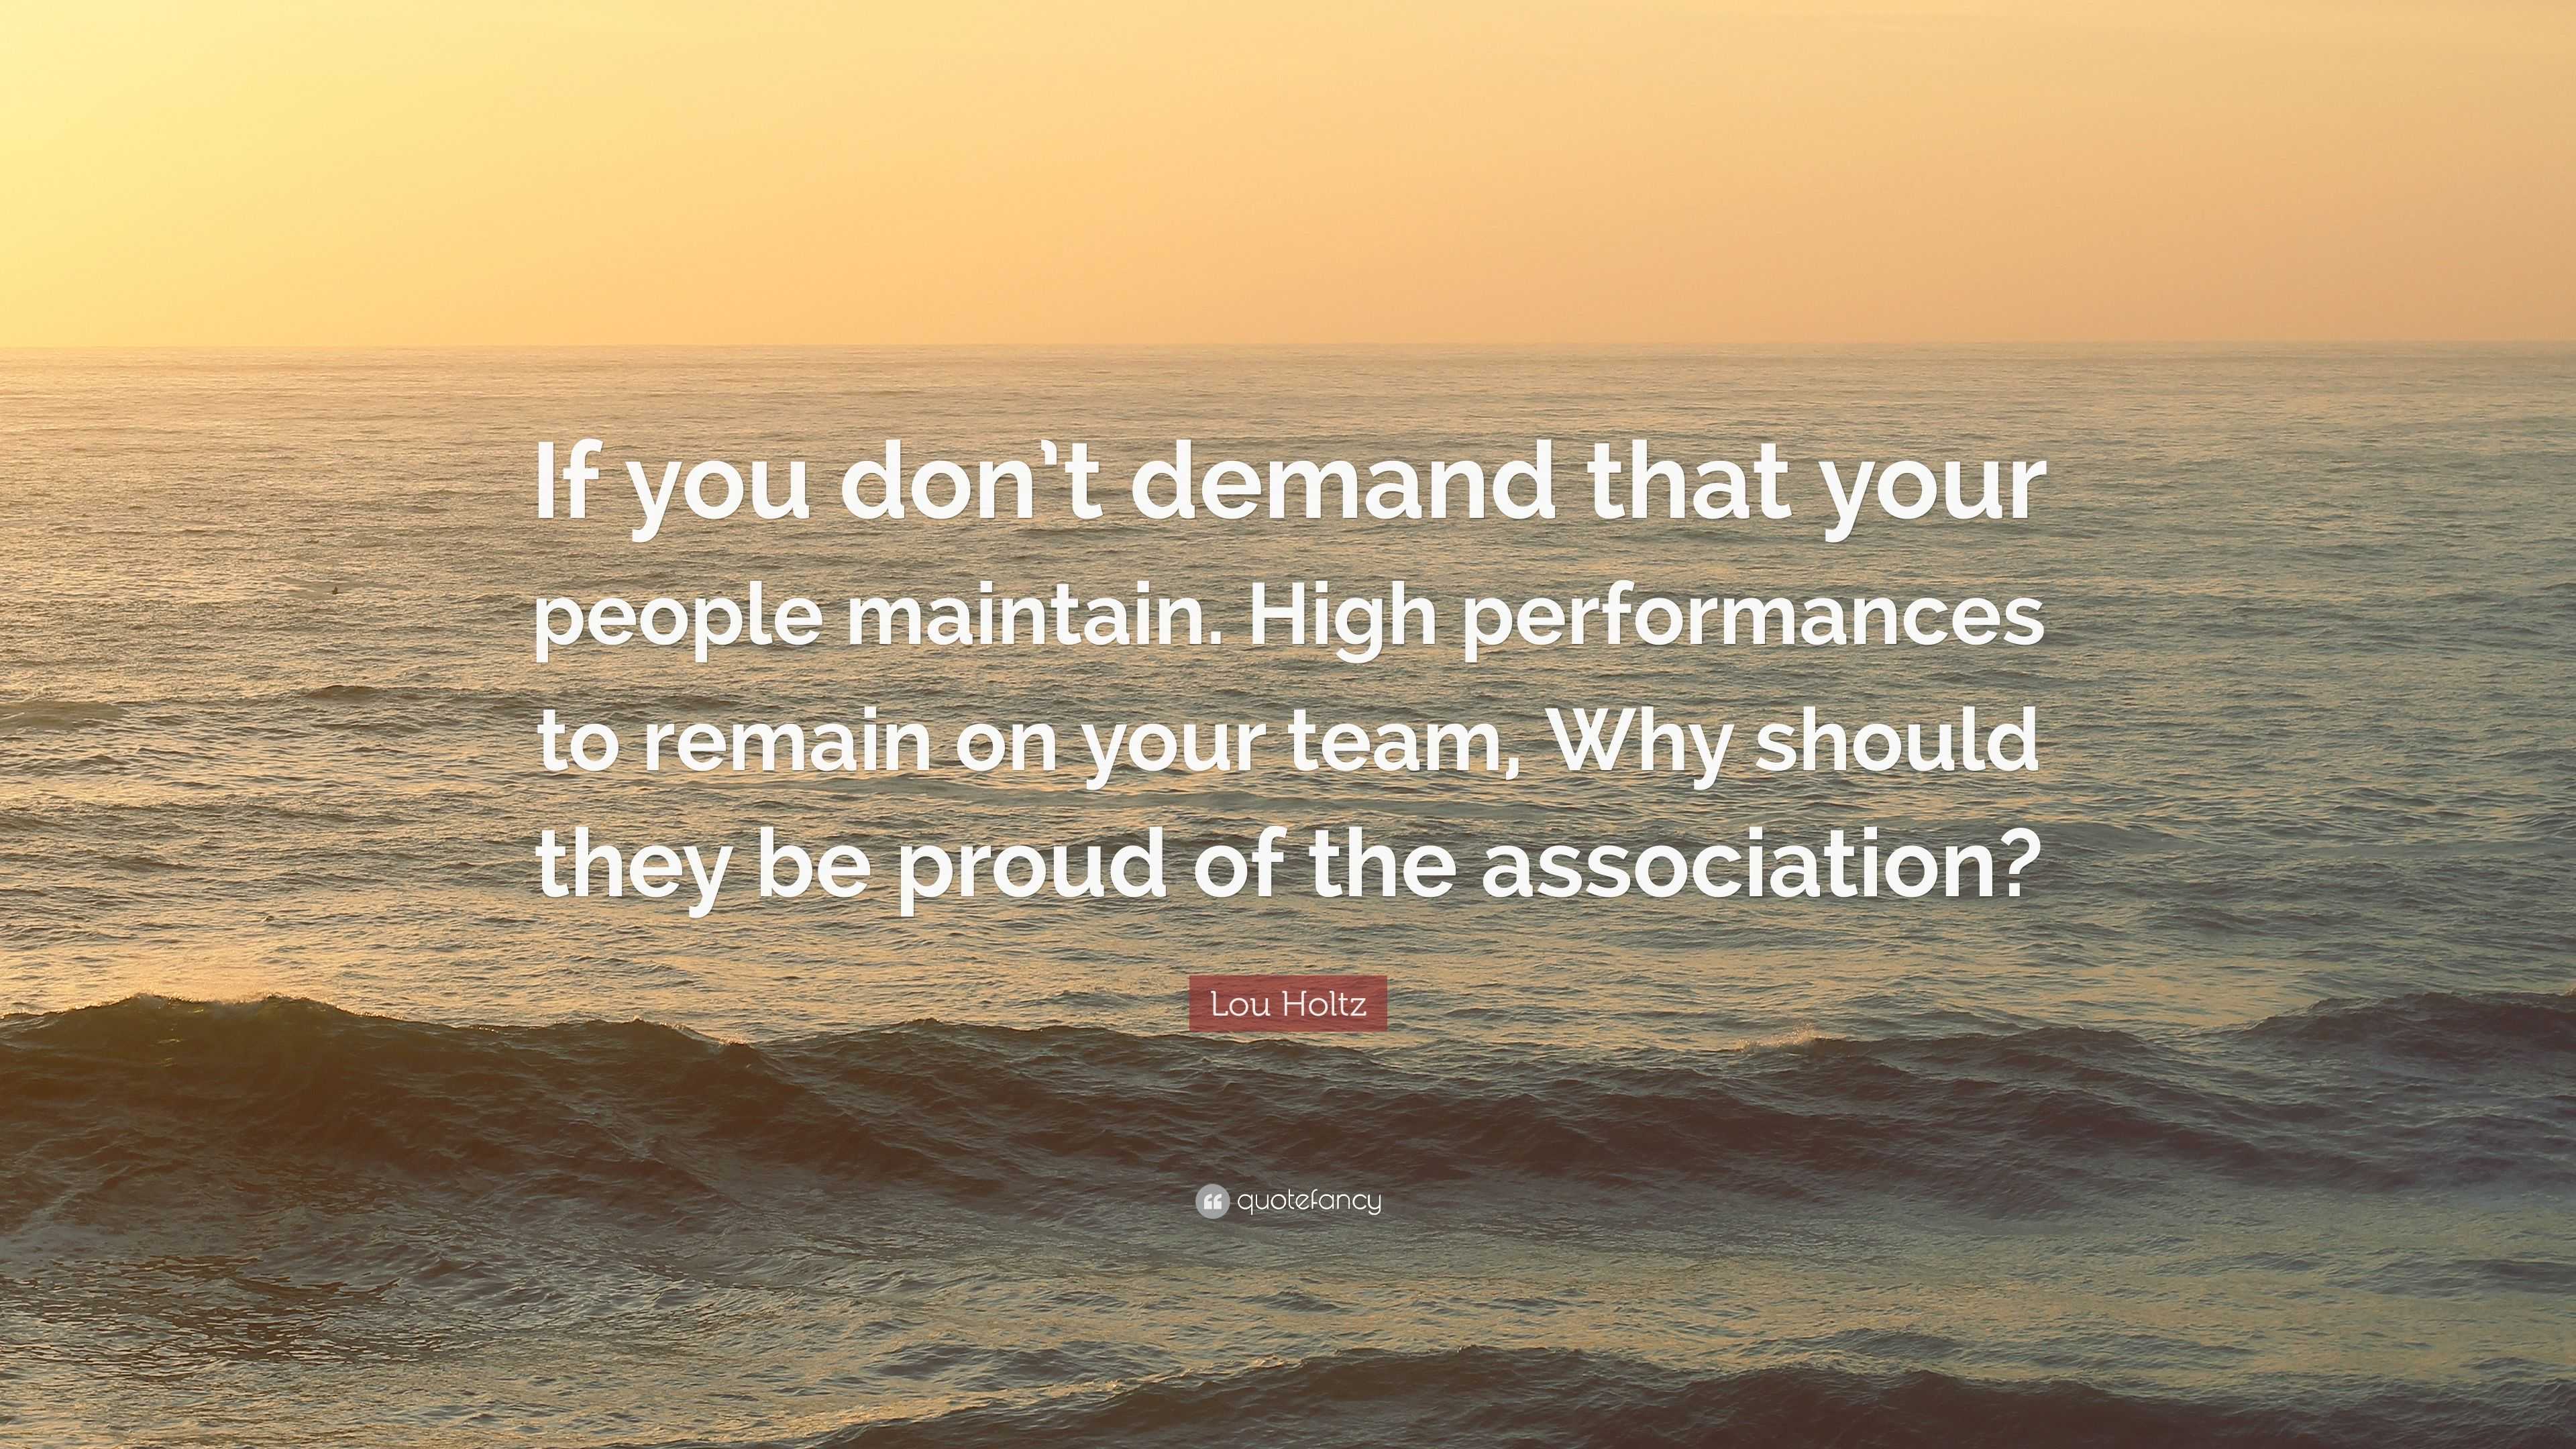 Lou Holtz Quote: “If you don’t demand that your people maintain. High